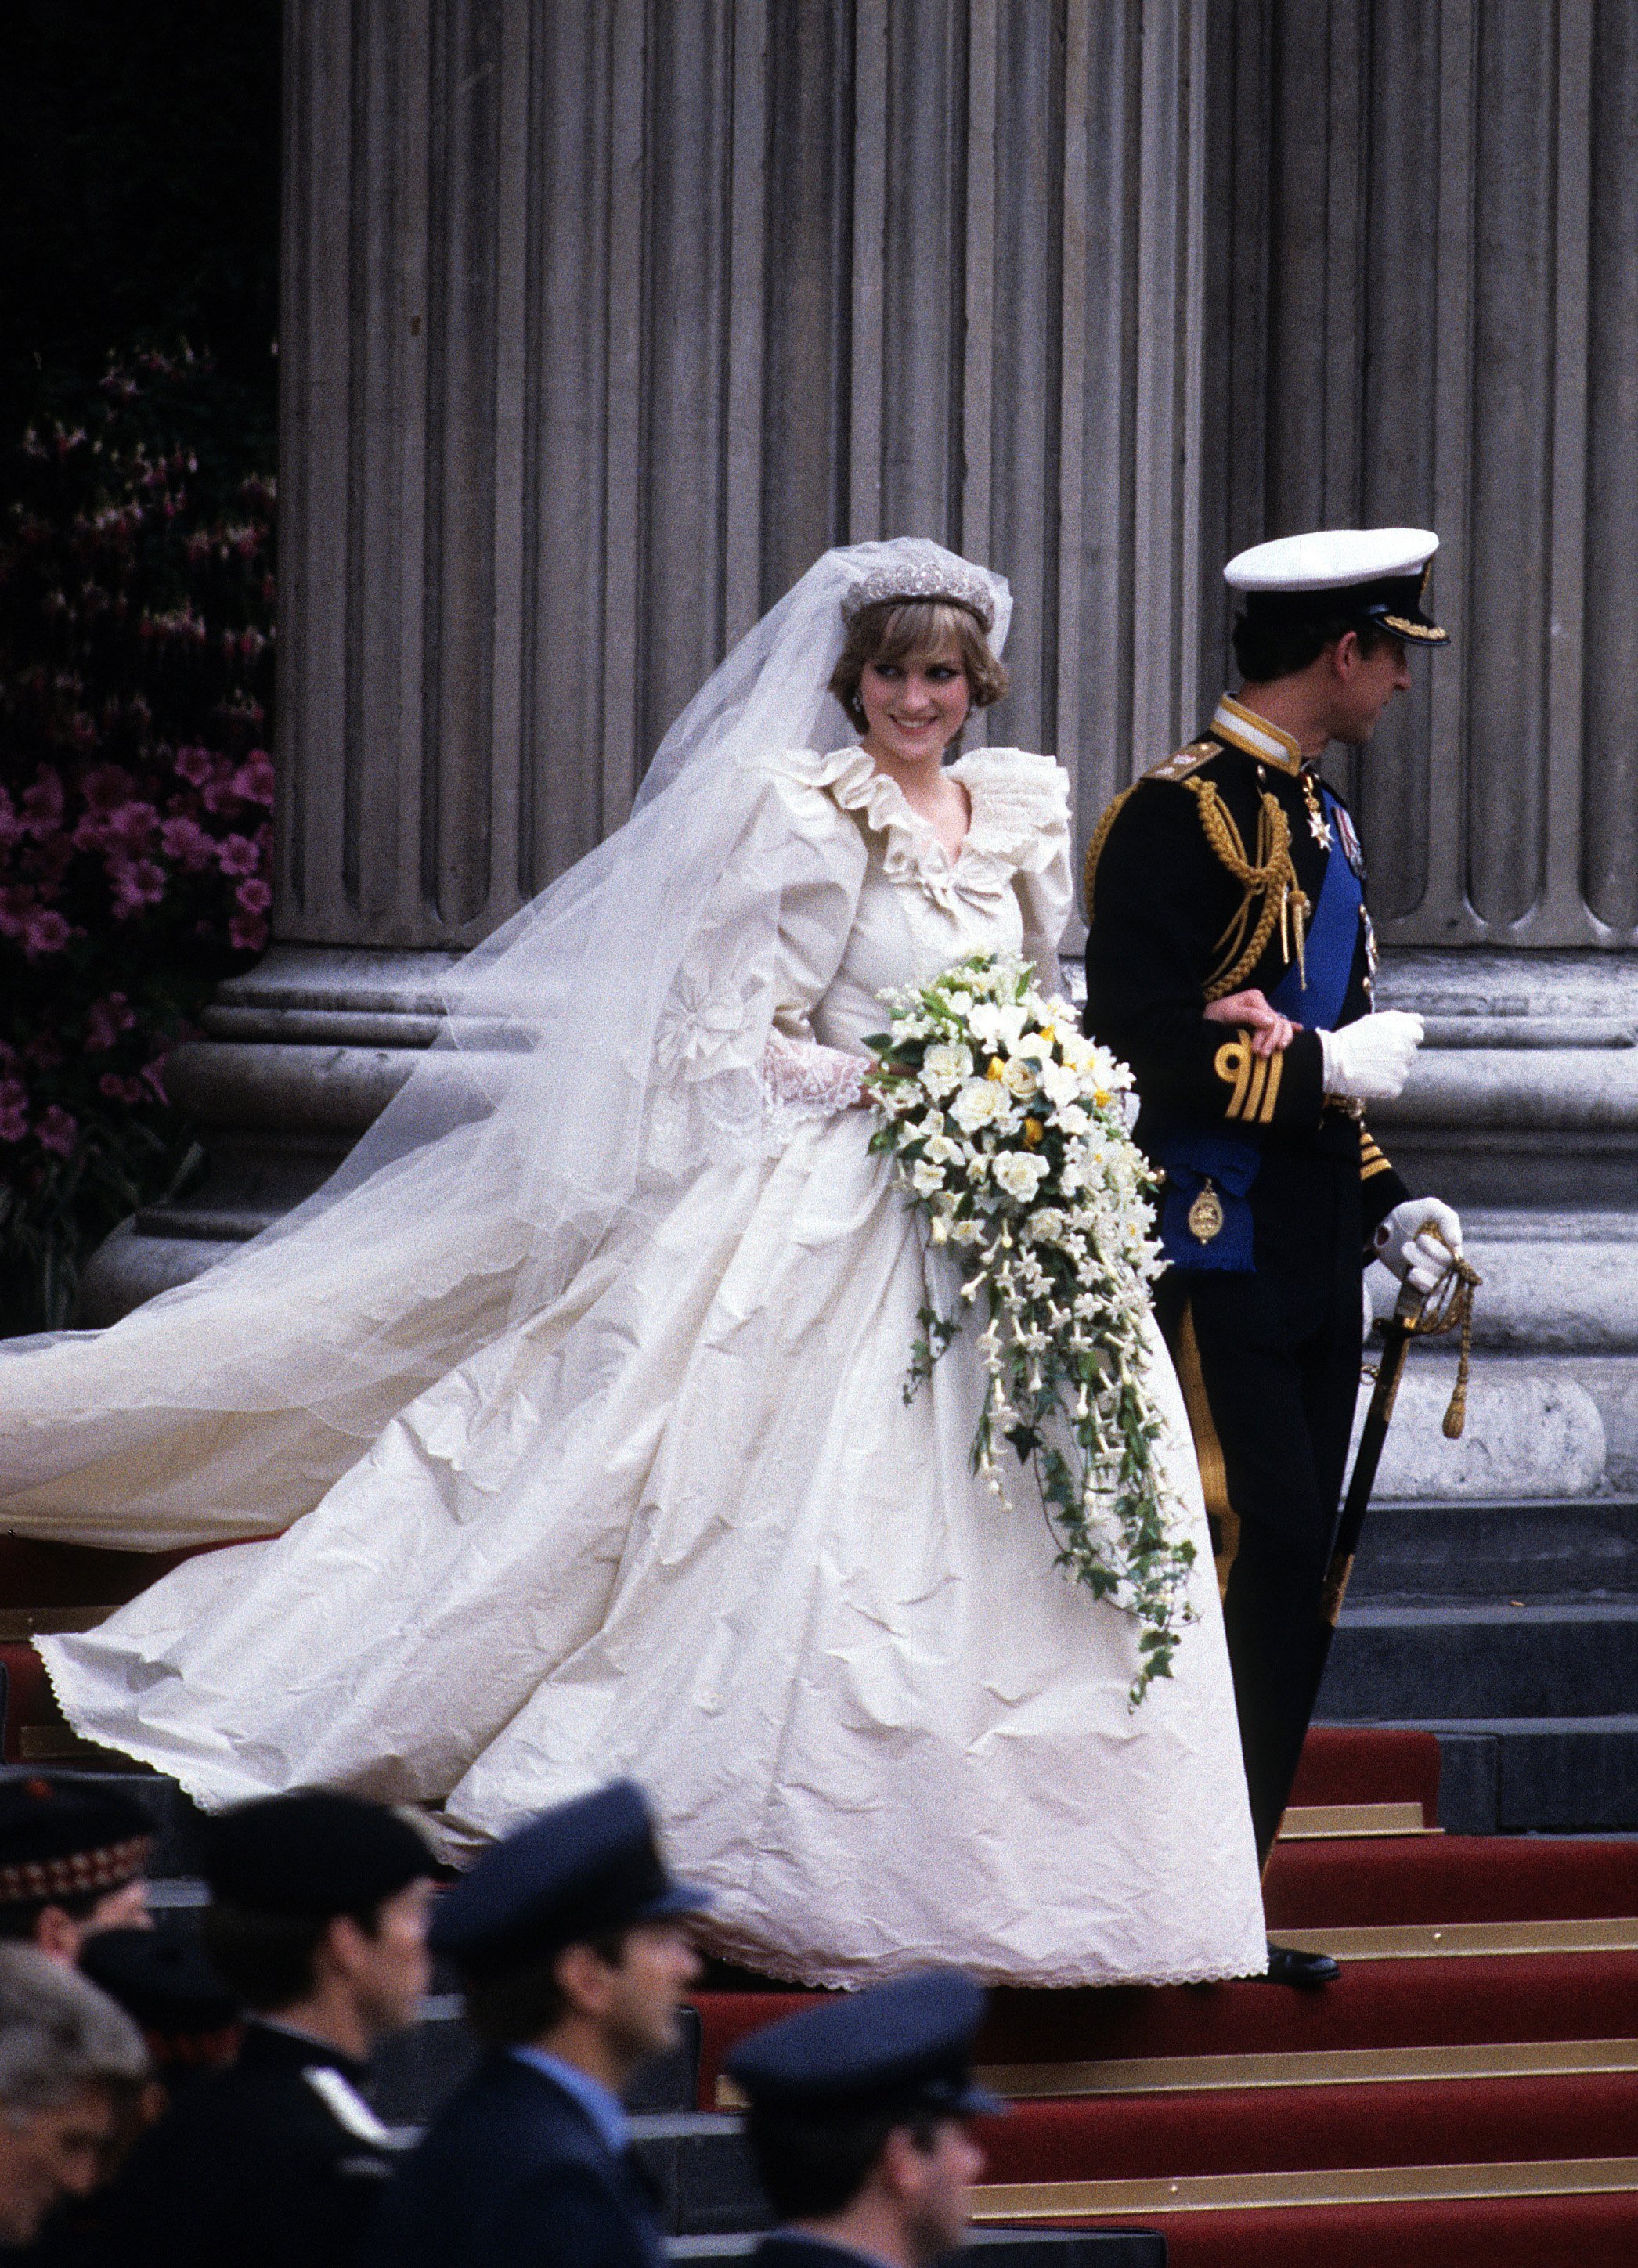 Prince Charles and late Princess Diana leave St. Paul's cathedral following their wedding July 29, 1981. | Source: Getty Images